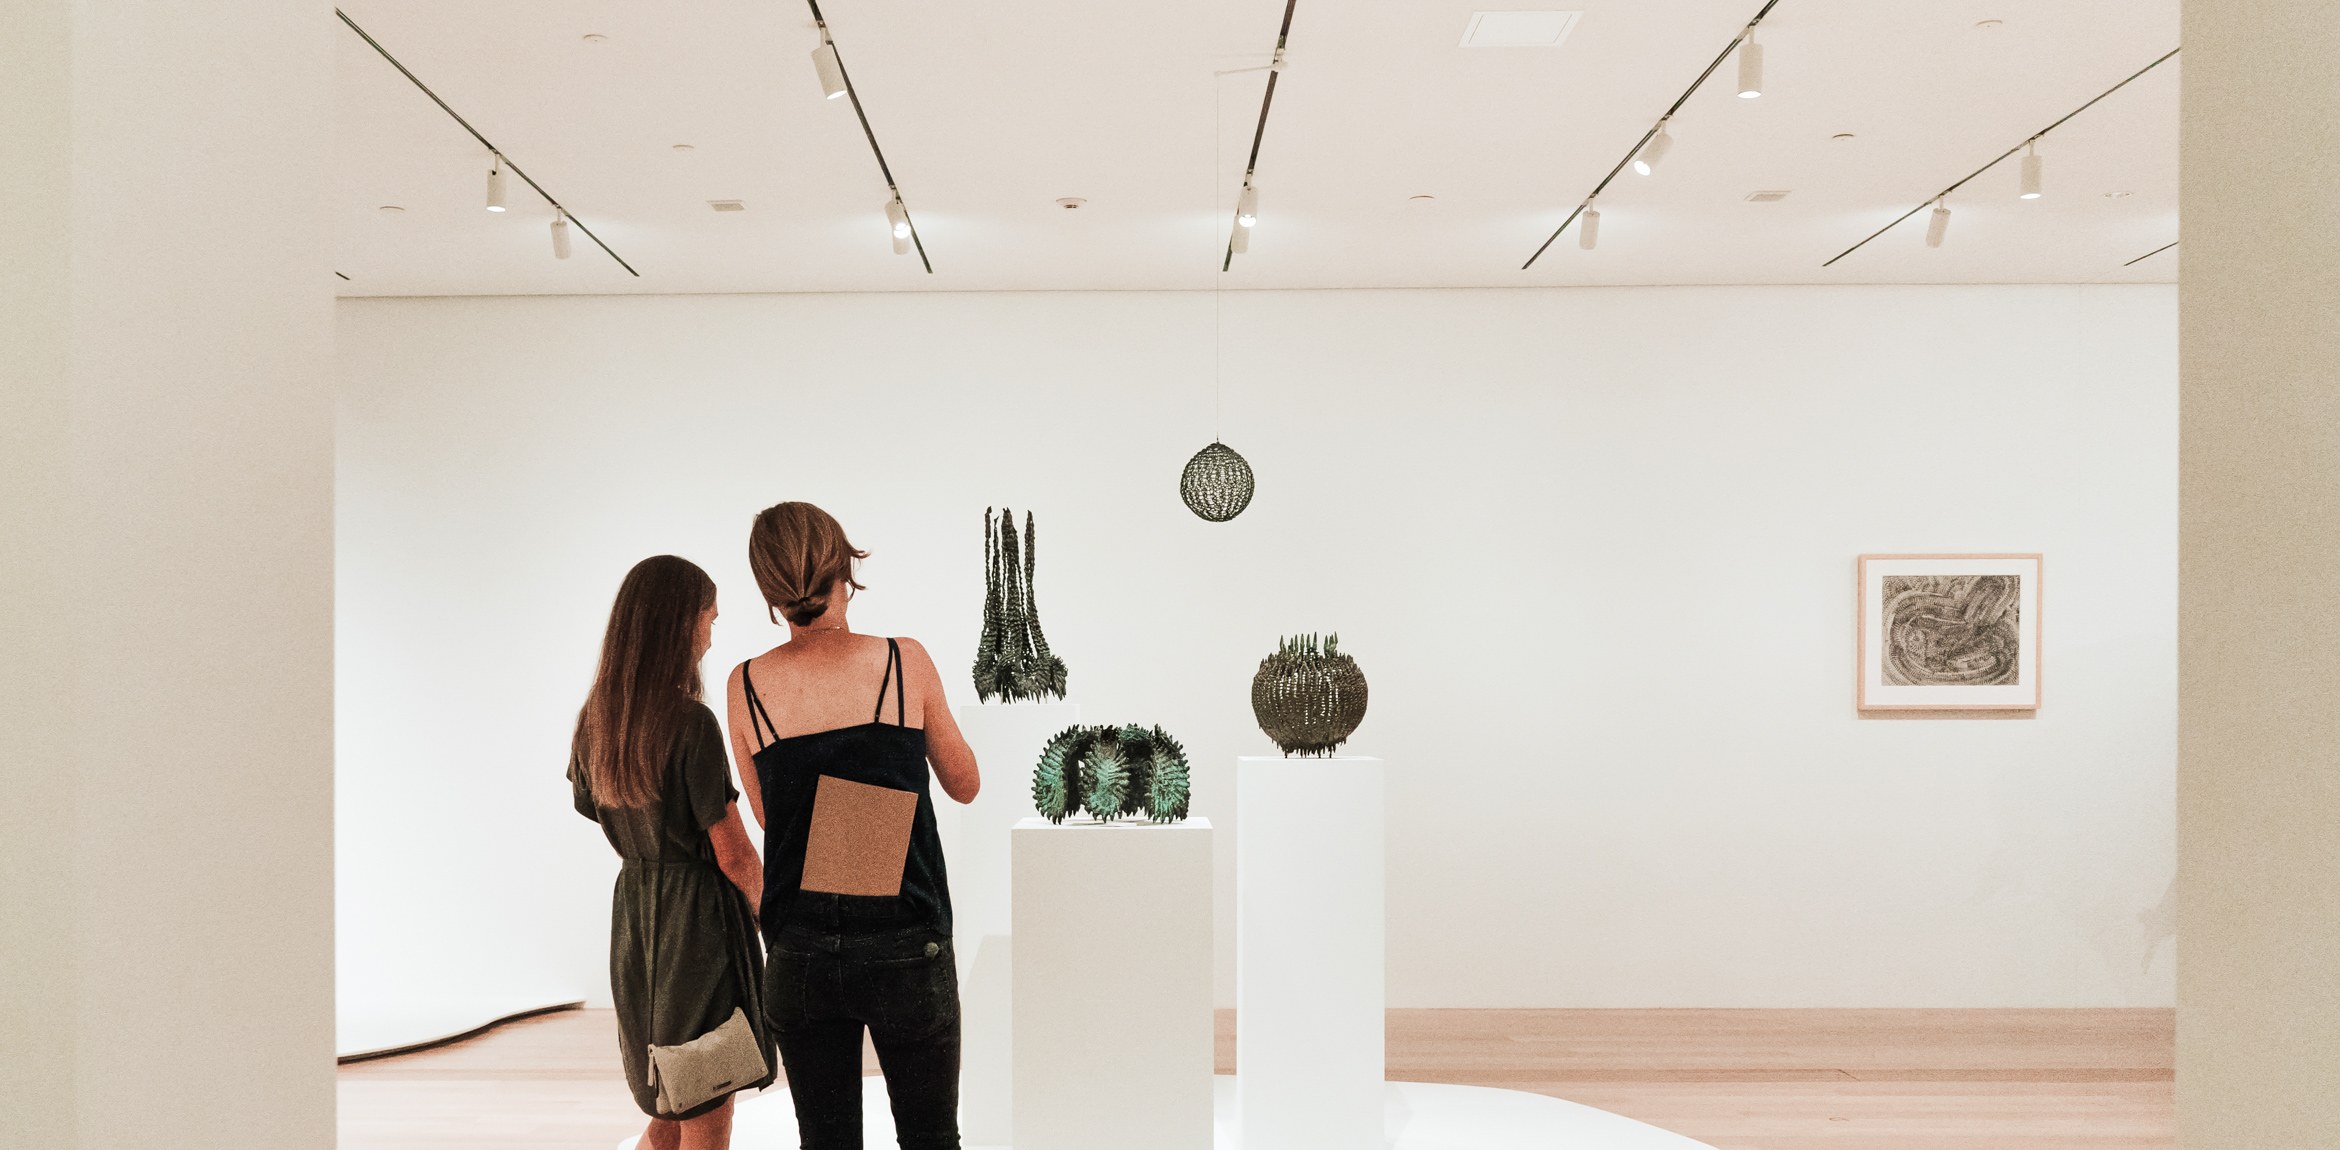 Two visitors view works by Ruth Asawa in the Lower East Gallery.